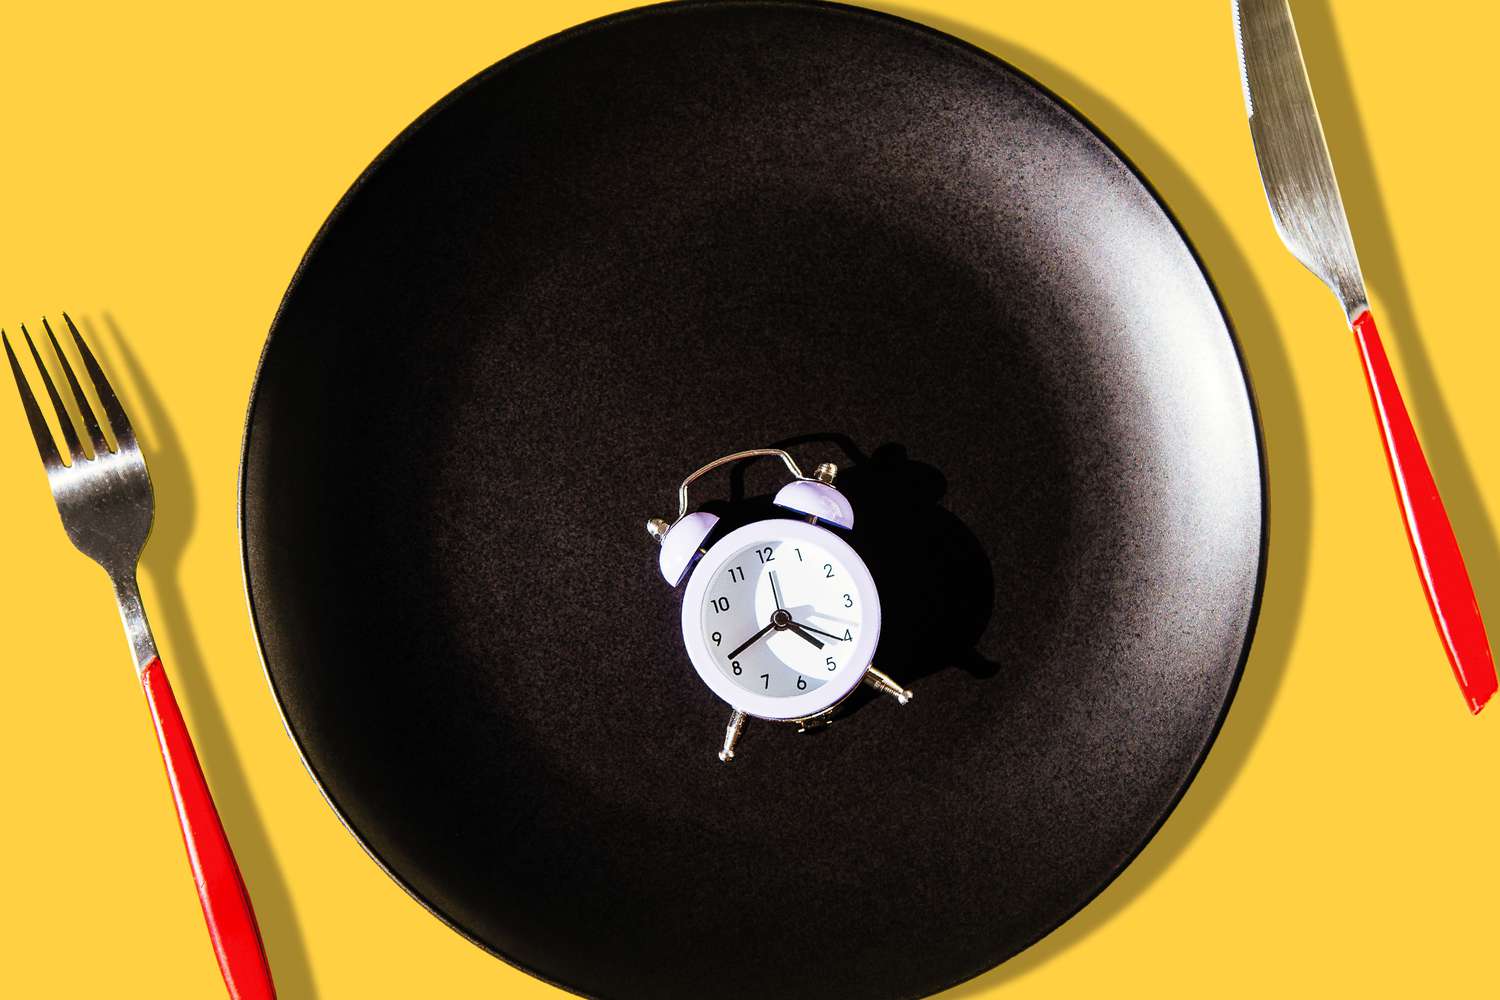 Small clock alarm on a black plate with red cutlery on yellow background